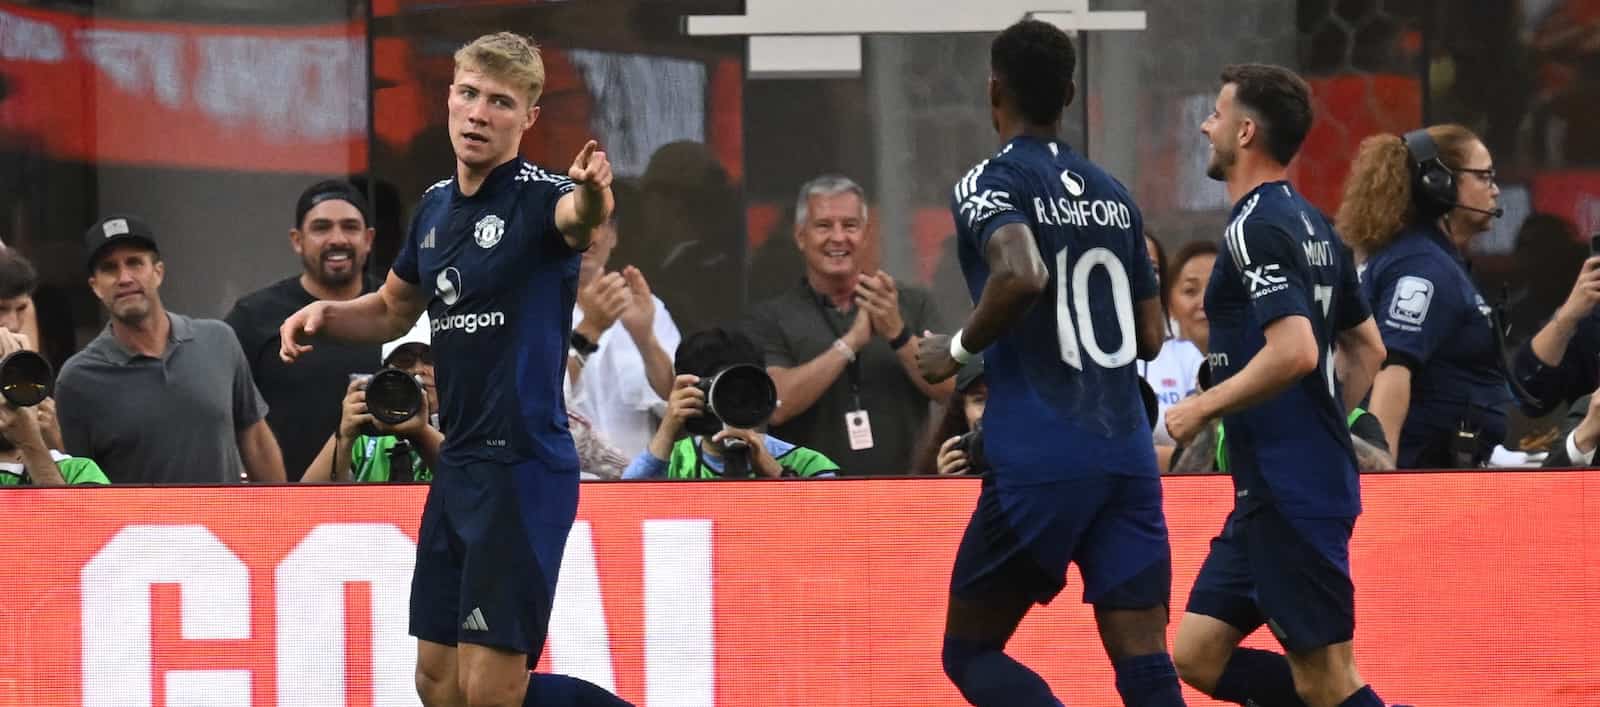 Three things we learned as Manchester United narrowly lose 1-2 to Arsenal in pre-season